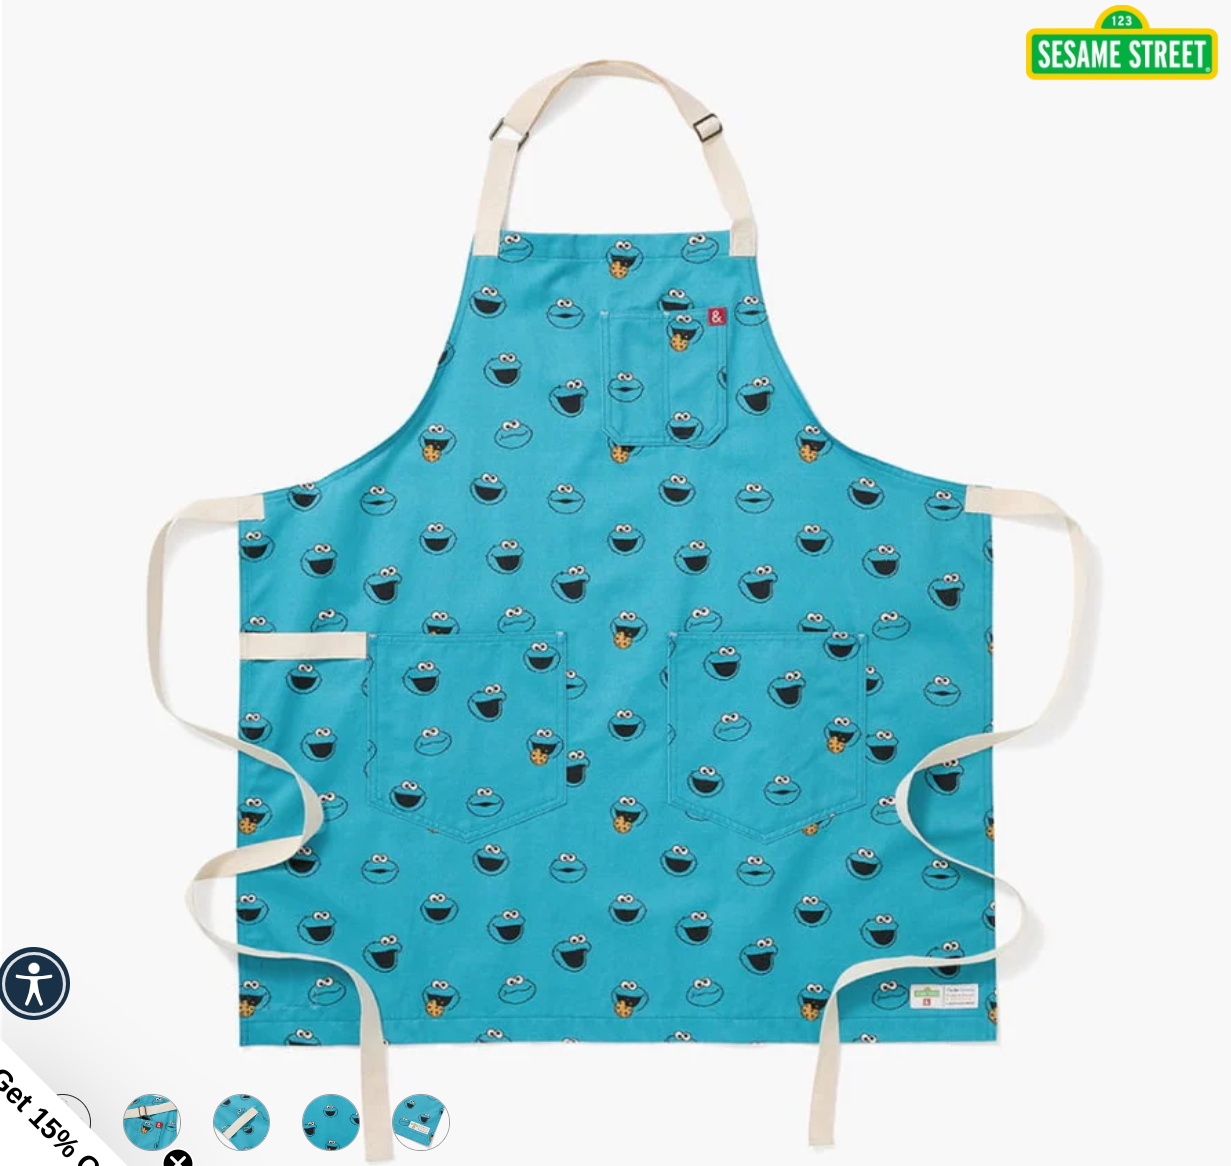 Photo Of a Blue Apron with the cookie monster all over it.